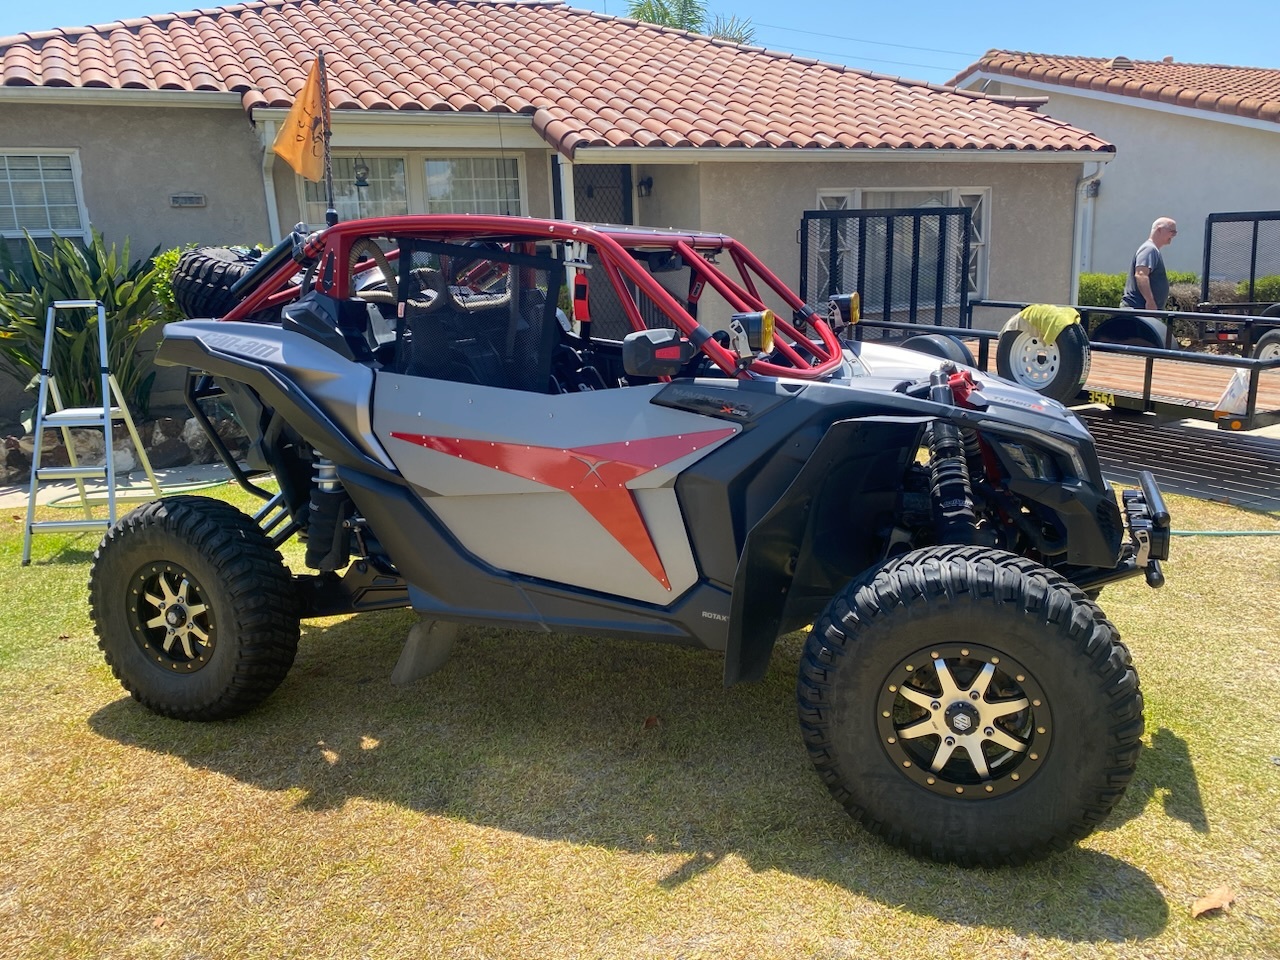 For Sale: Can am x3 xrs 2017 upgraded  - photo1